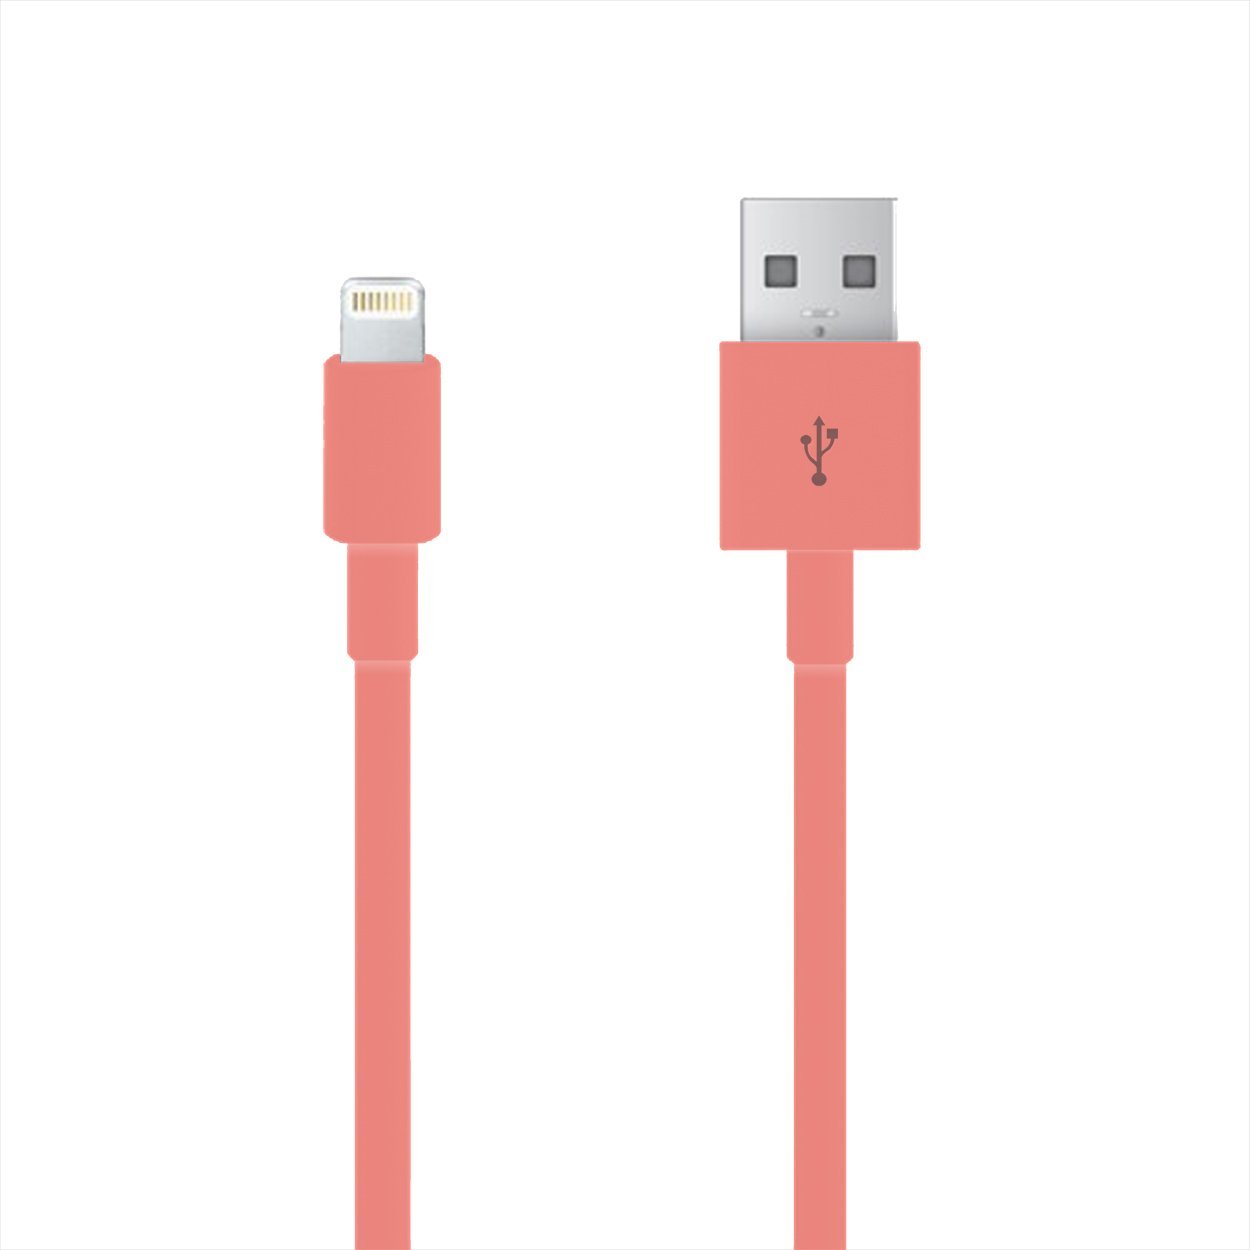 PINk iPhone 5/5S/5C/6 CE Certified Charging Cable!!!! Compatible With All iOS Systems!